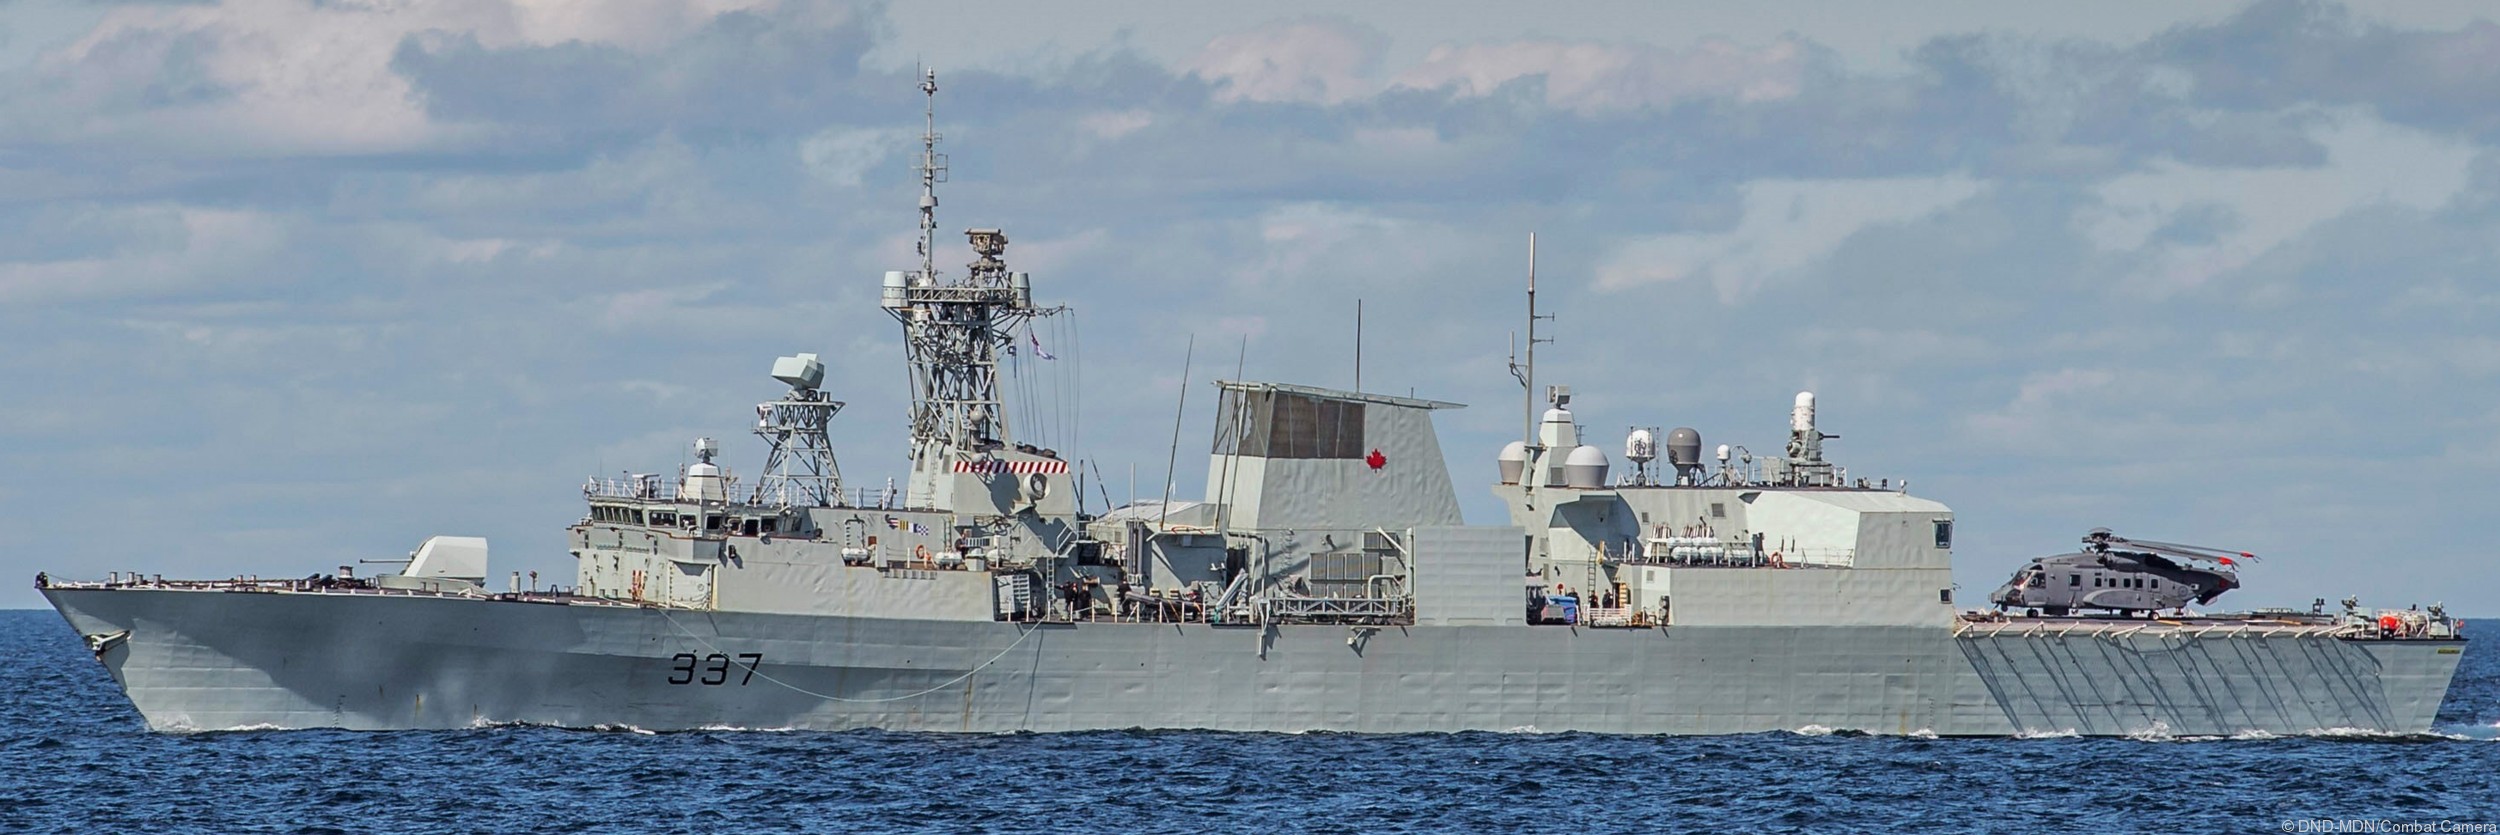 ffh-337 hmcs fredericton halifax class helicopter patrol frigate ncsm royal canadian navy 16